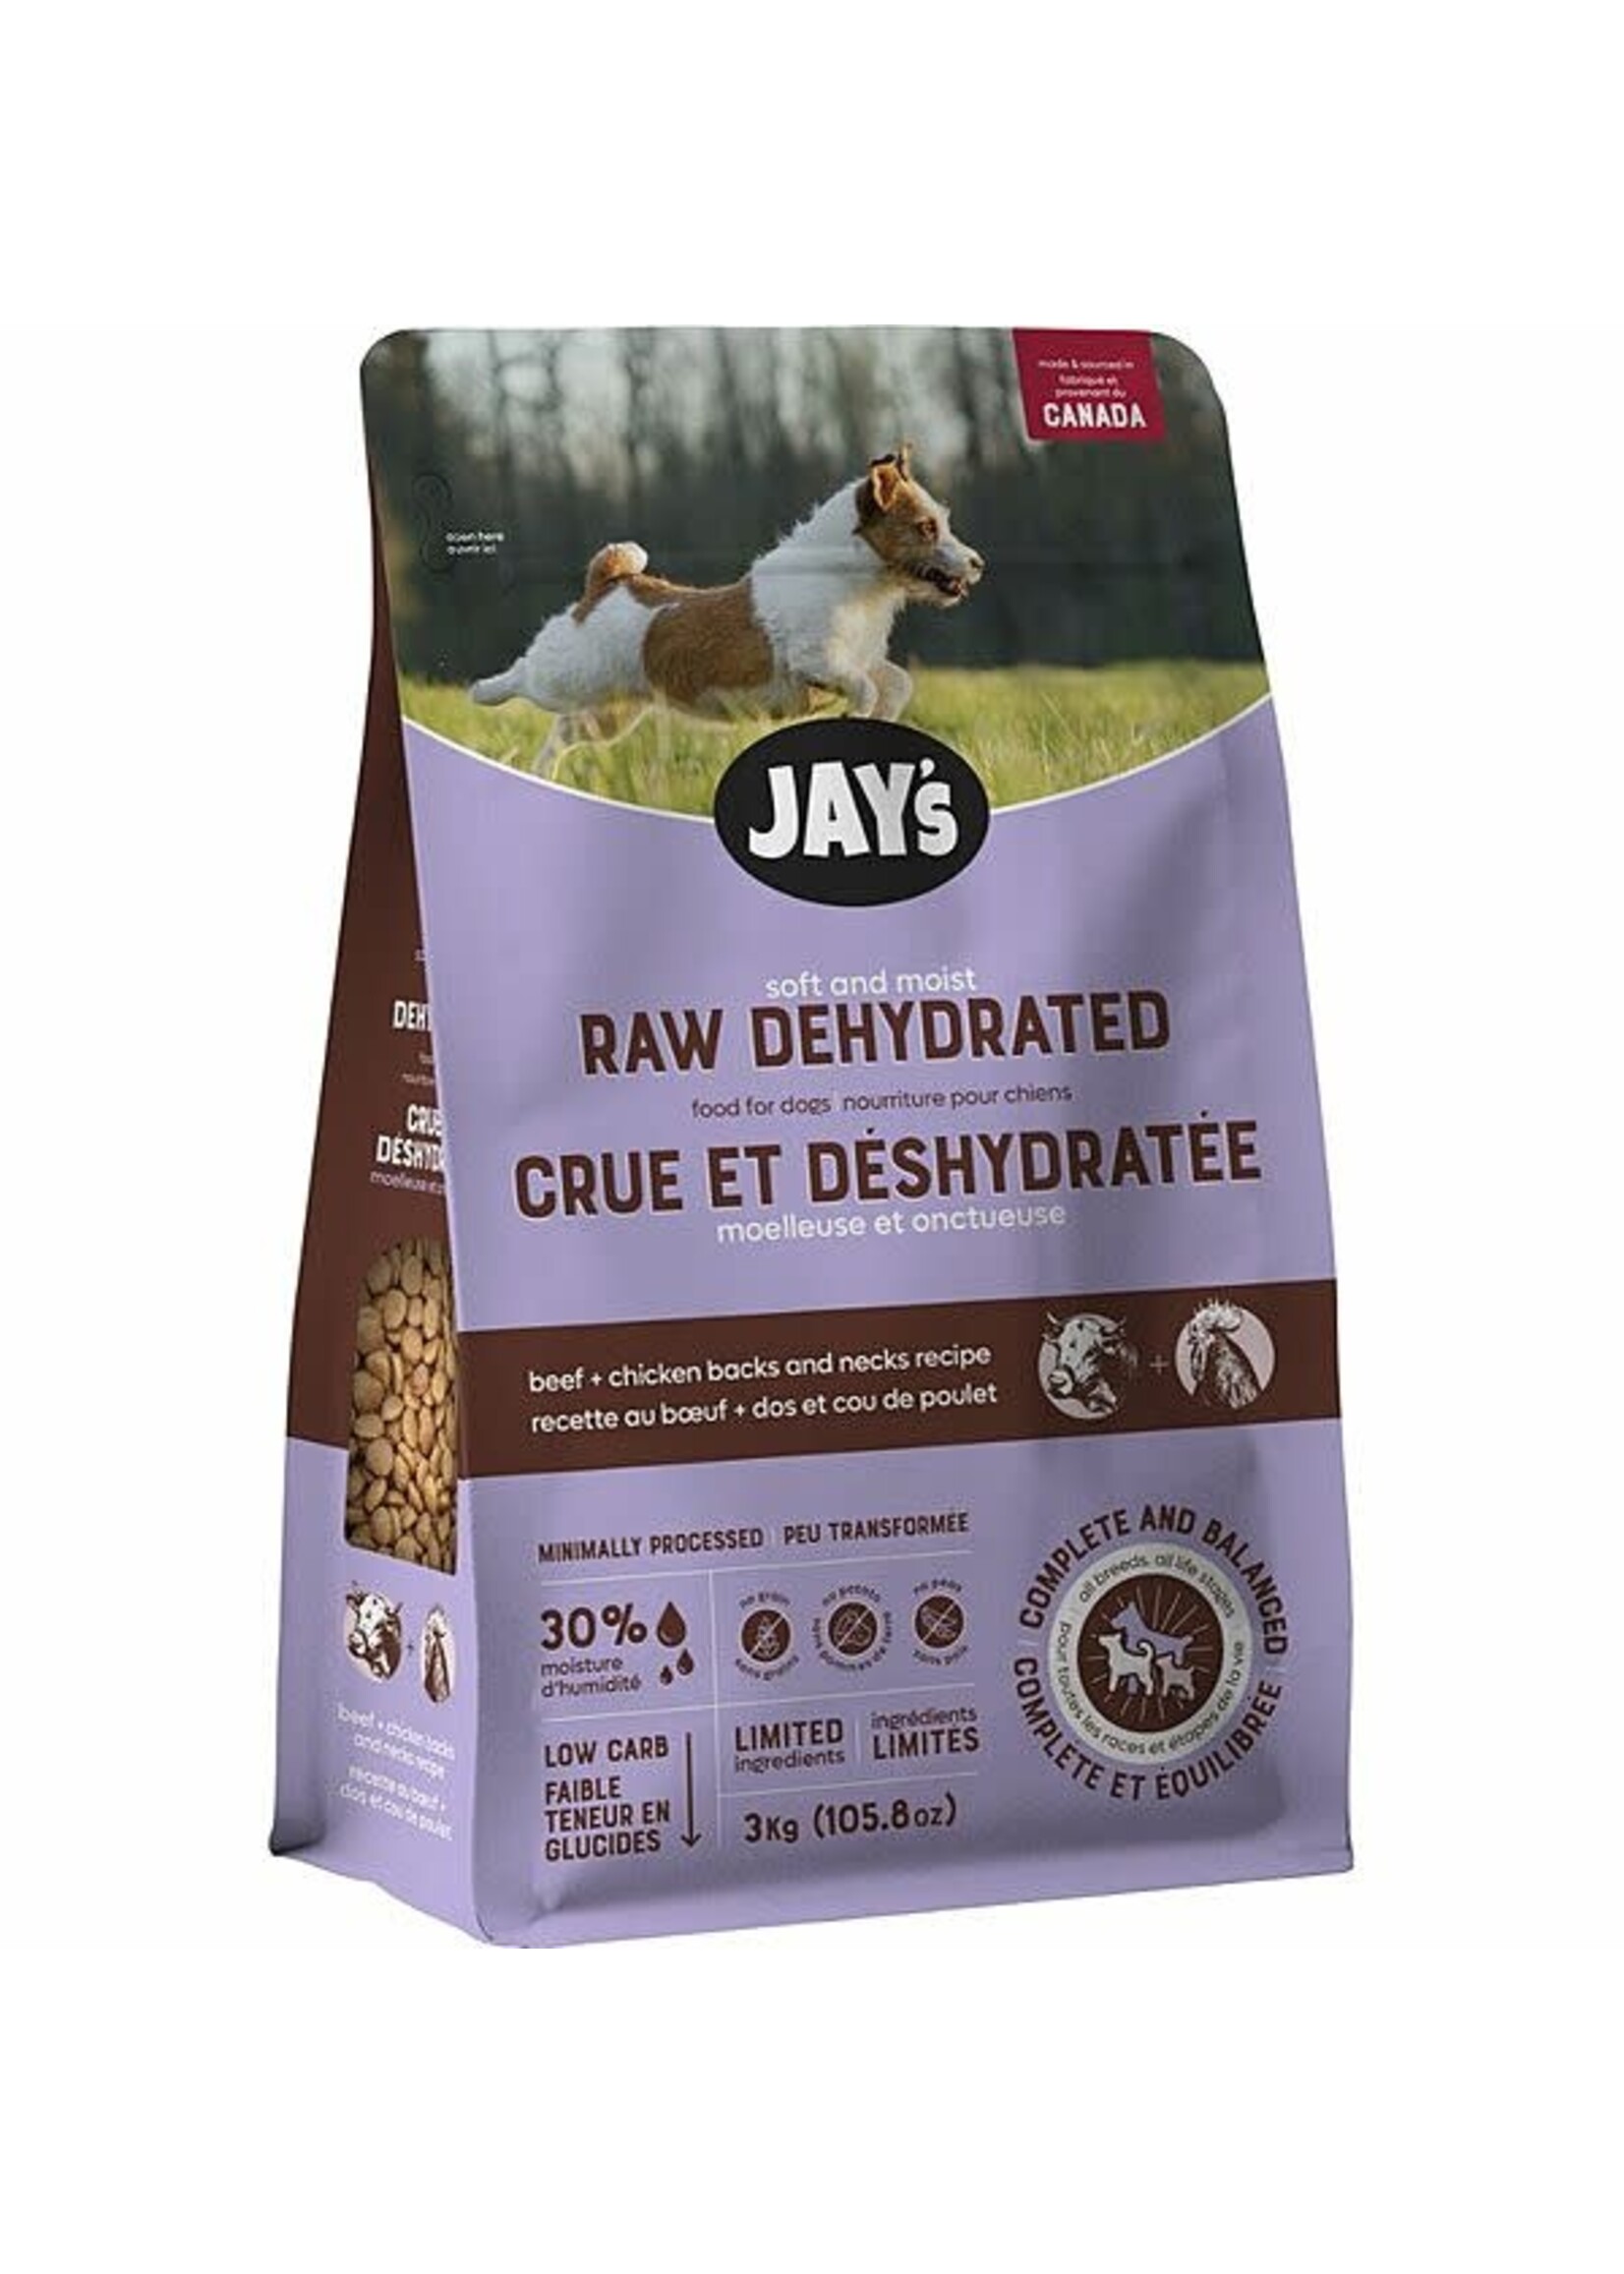 Jay's Jay's Soft & Moist Raw Dehyrated Beef & Chicken Back/Neck